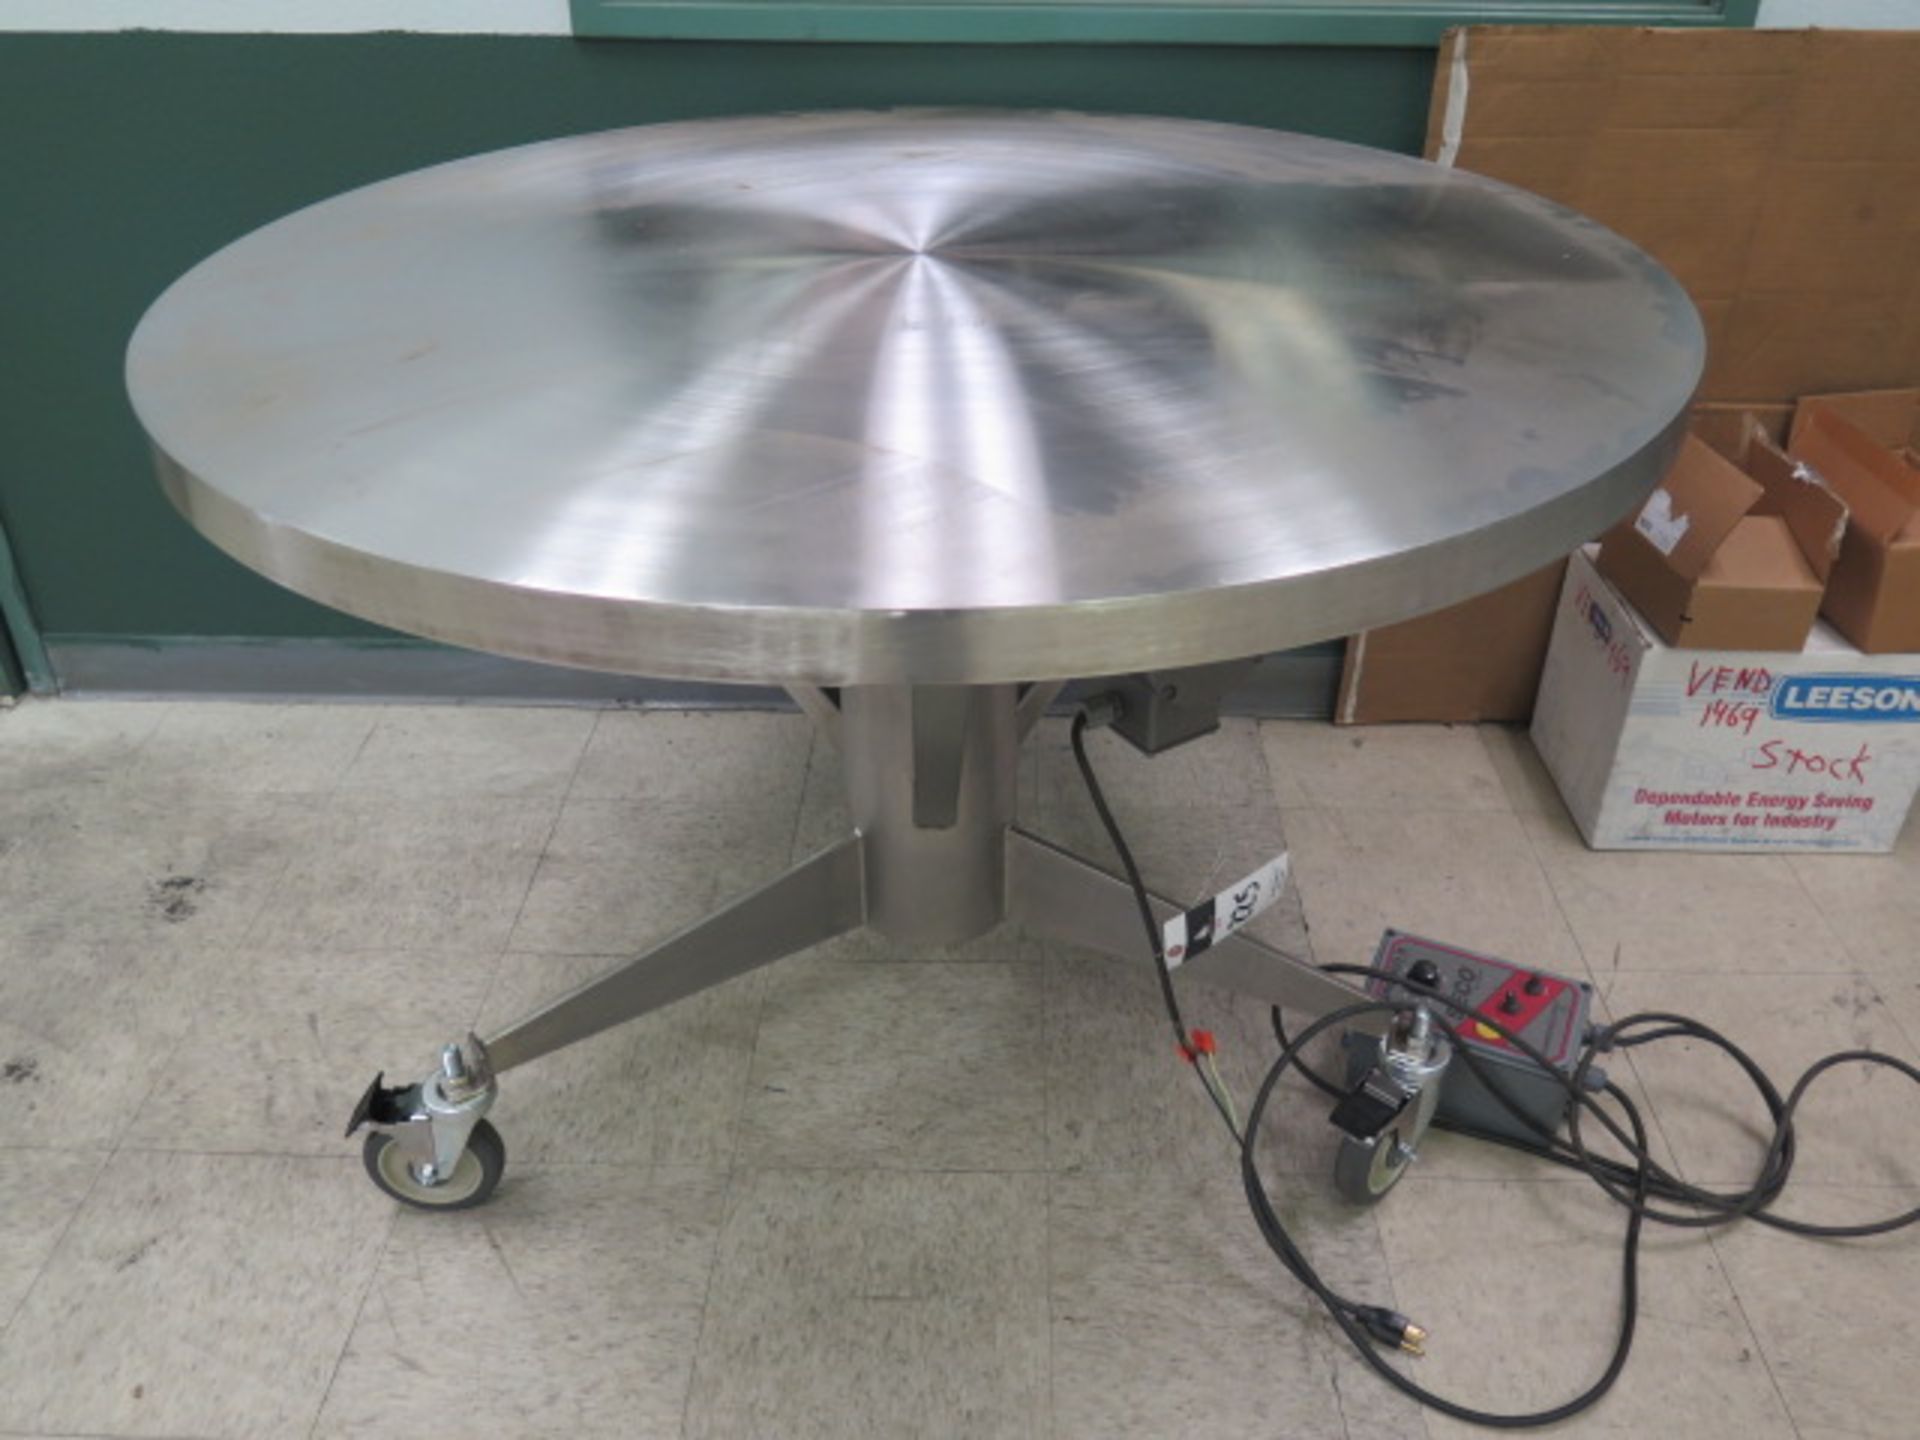 48” Stainless Steel Motorized Turntable (NOT FINISHED)